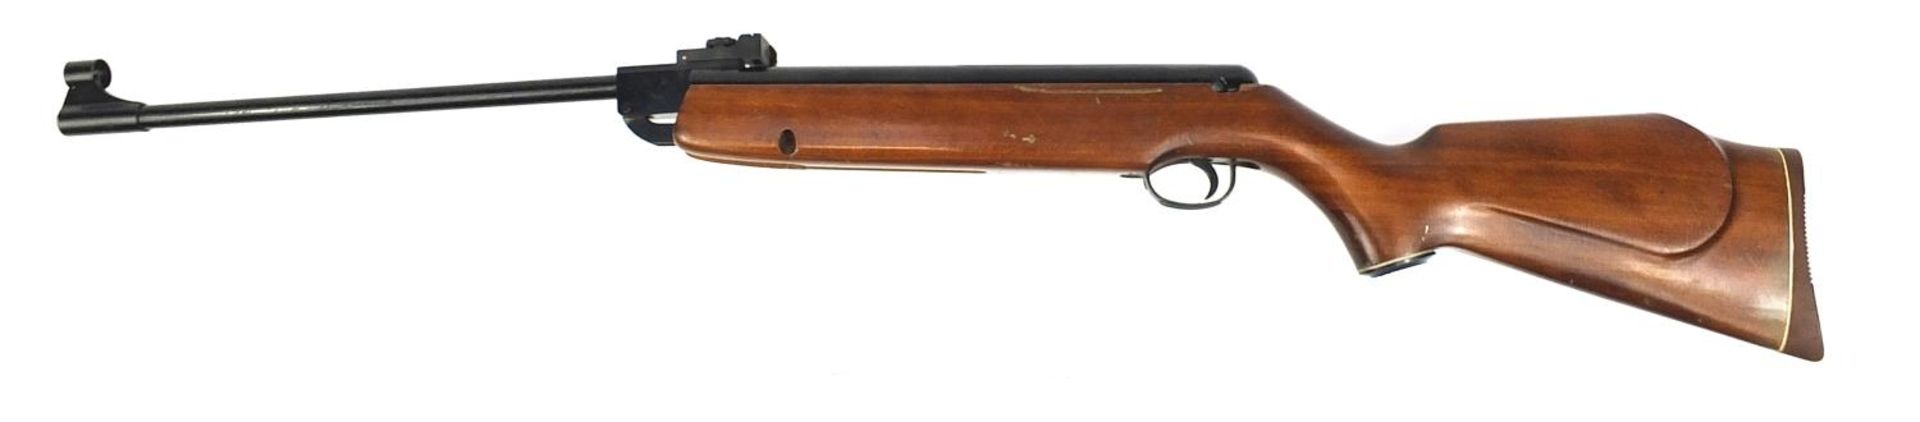 Vintage Webley Vulcan .22 cal break barrel air rifle, 106cm in length :For Further Condition Reports